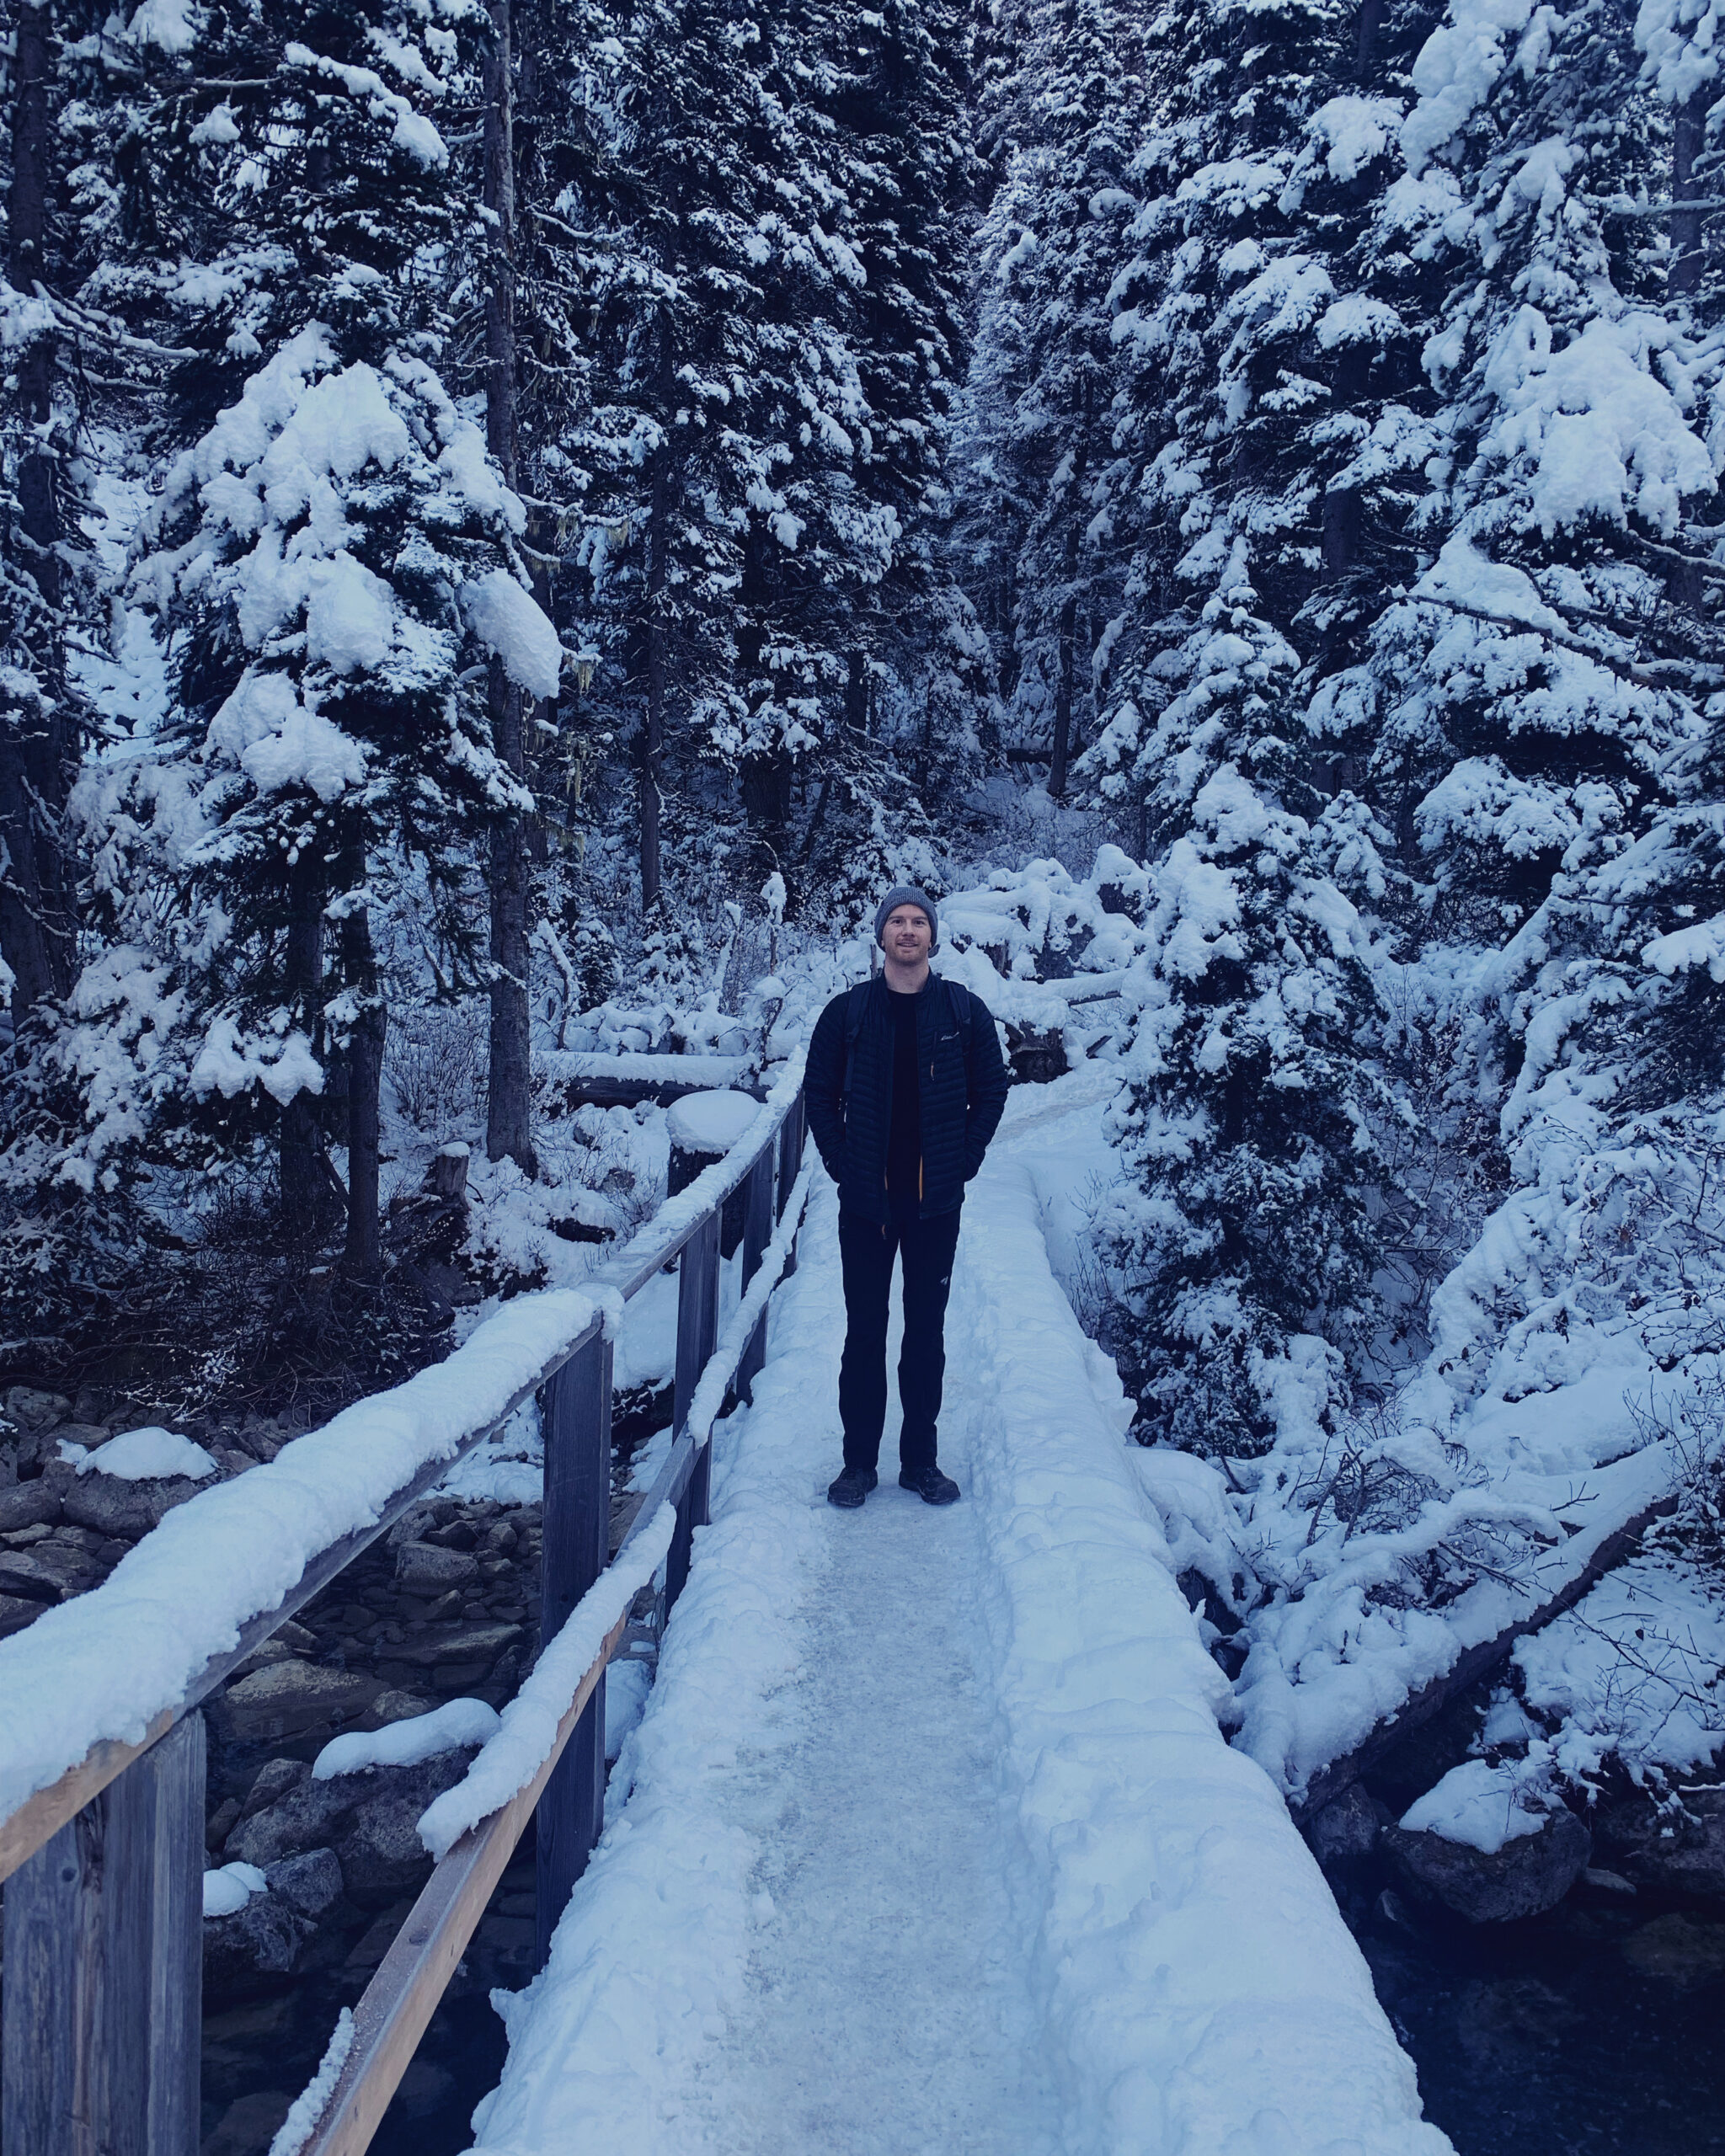 Man standing on snow covered bridge in snowy forest in British Columbia, Canada